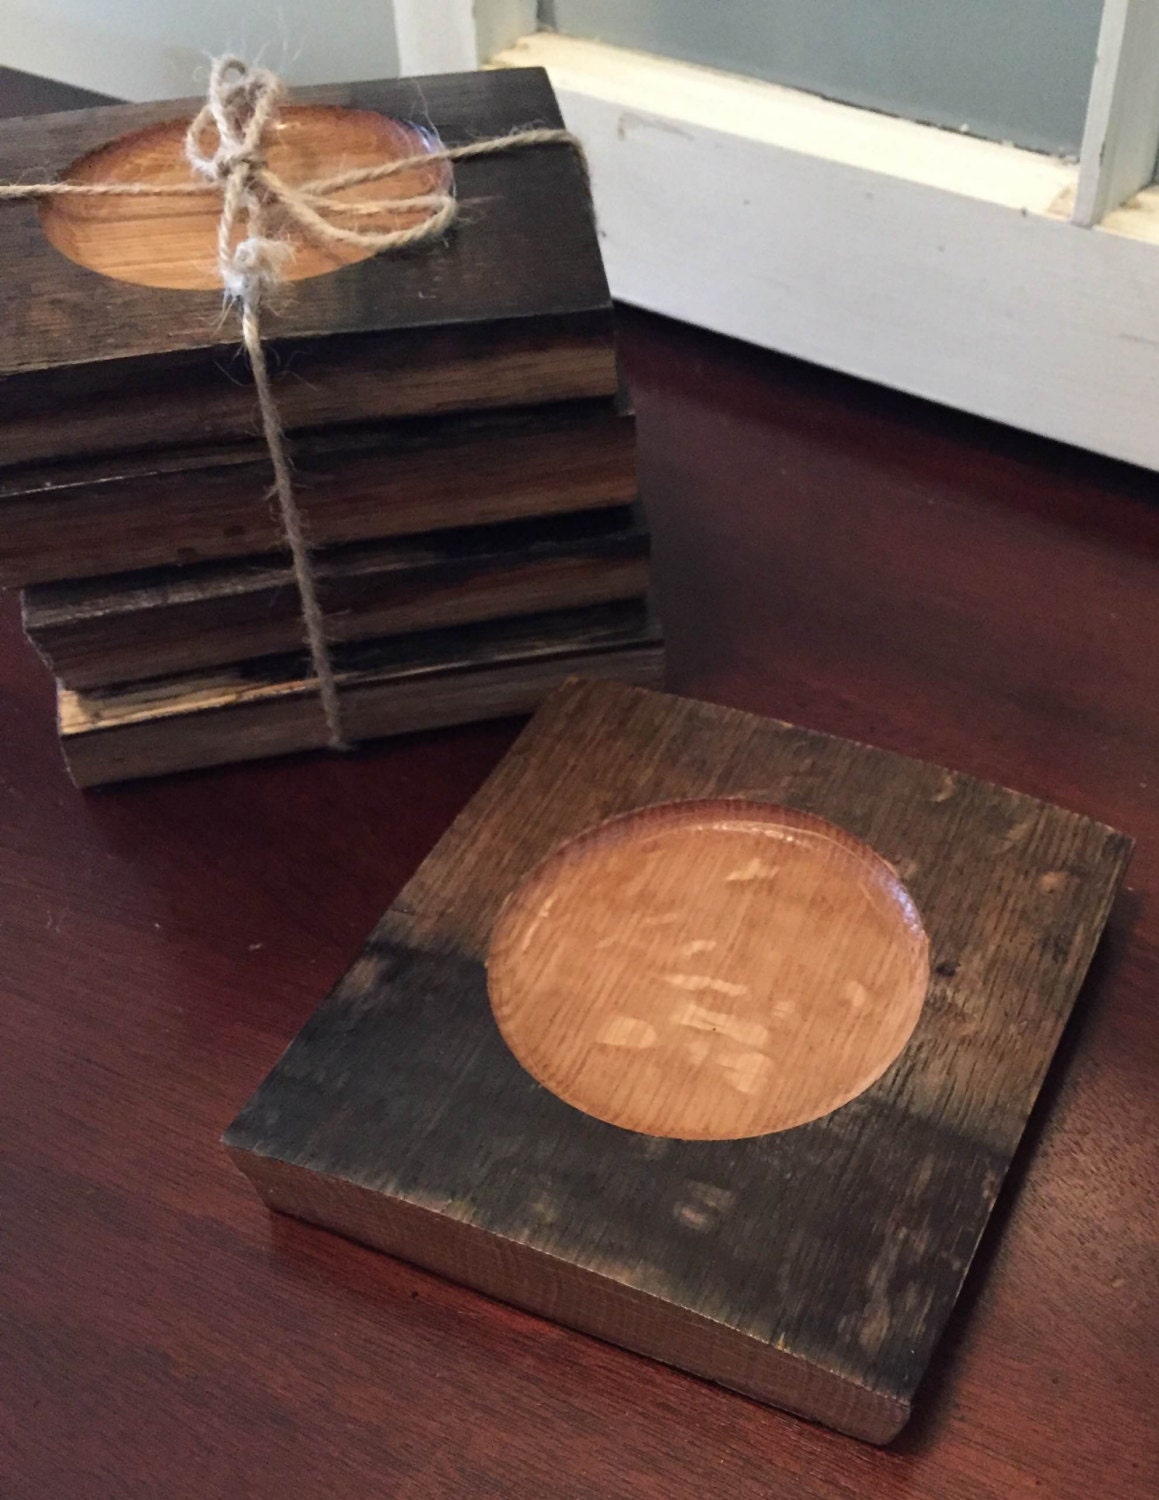 Whiskey Barrel Coaster Set - Made From A Reclaimed Whiskey Barrel Stave